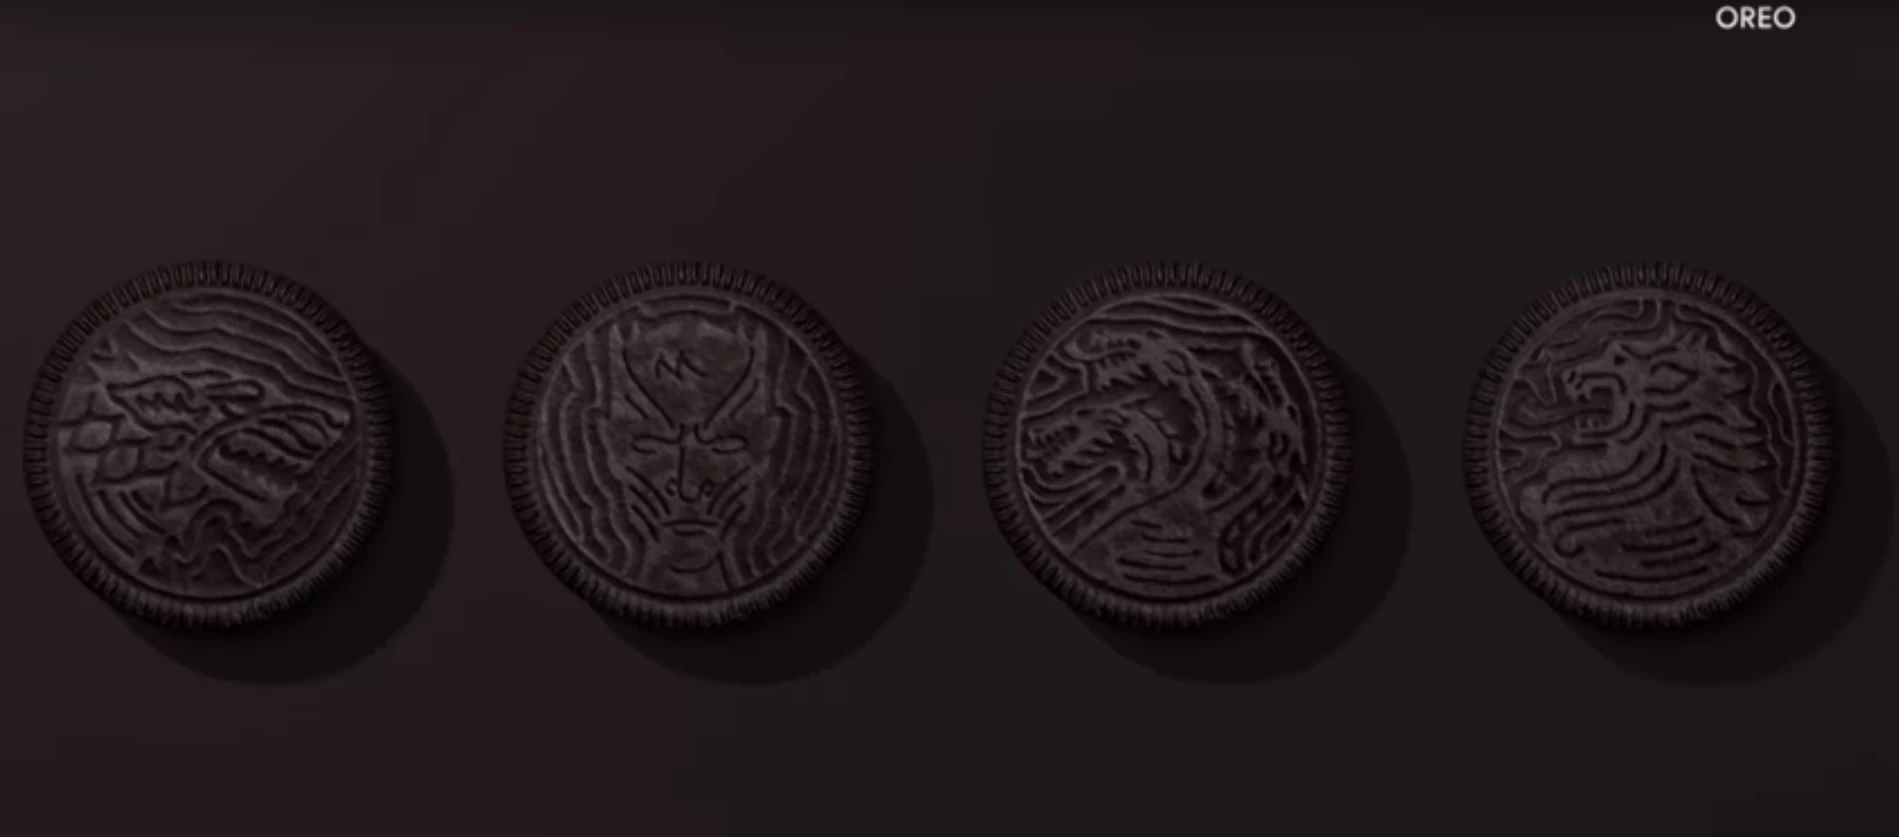 Game of Thrones 'Oreos' Are Coming - For Real